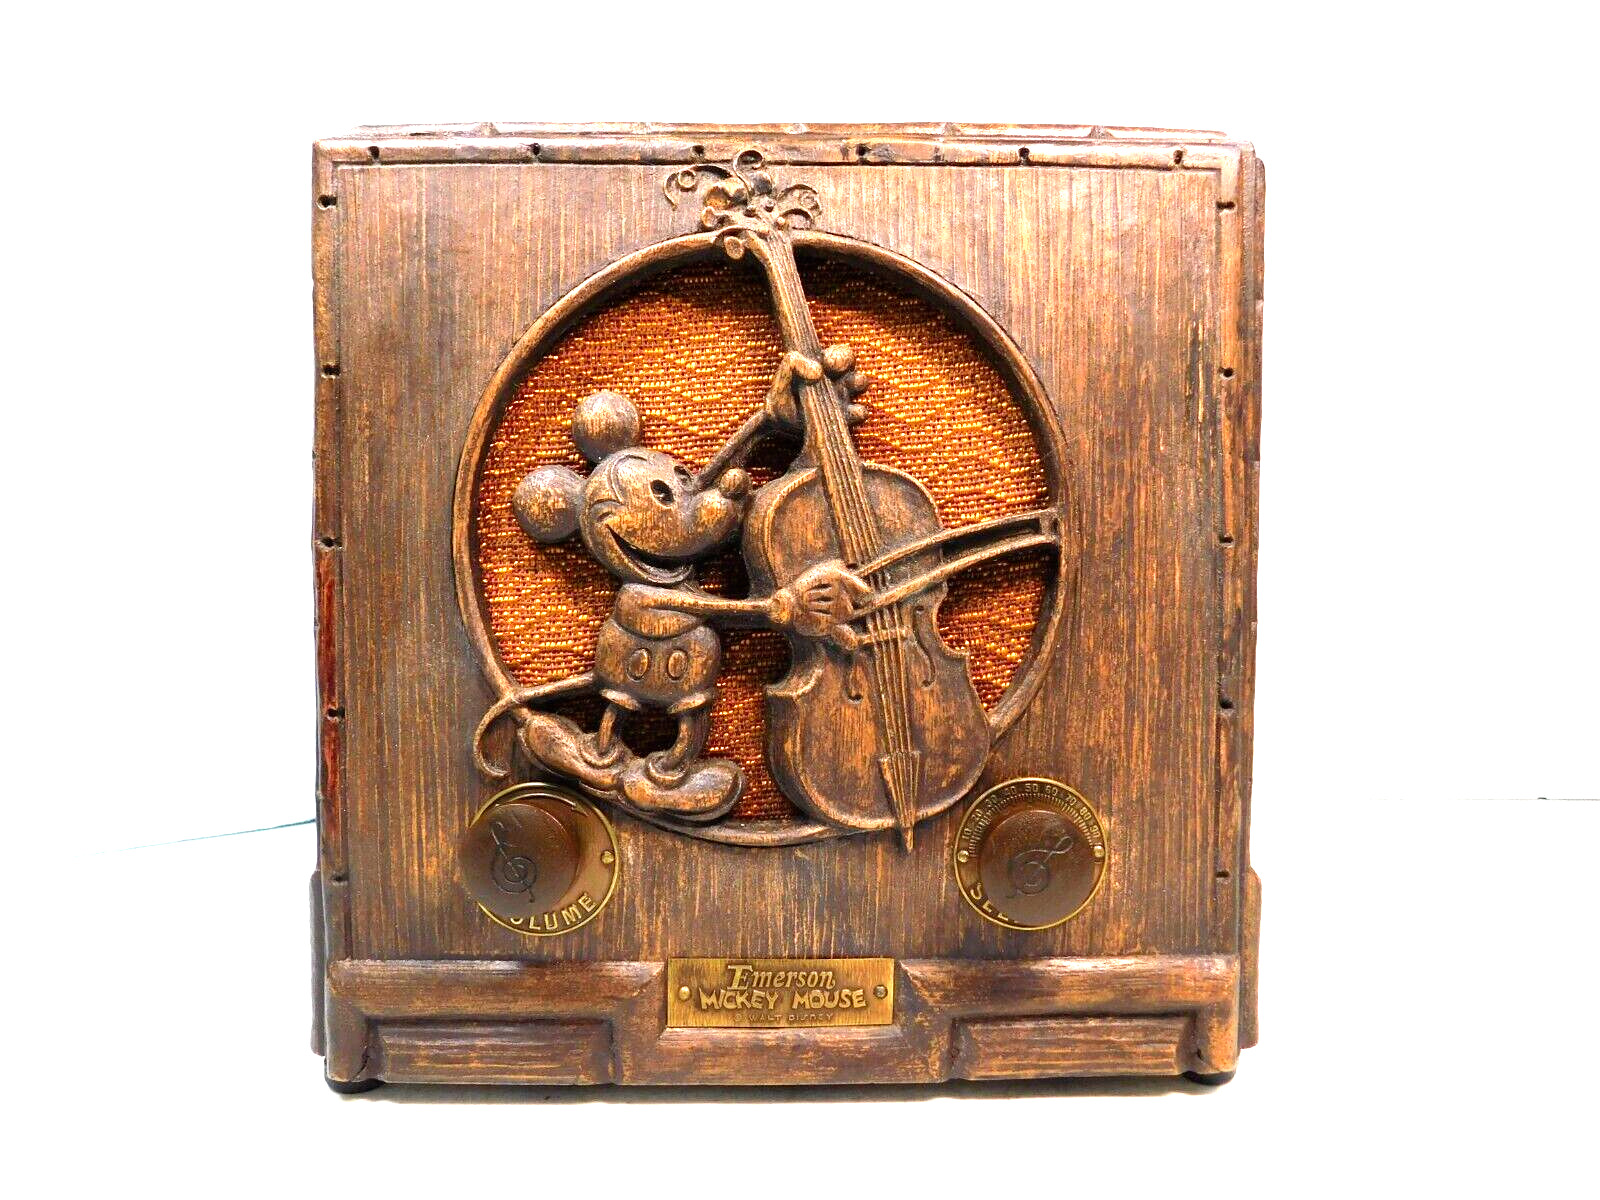 VINTAGE 30s NEAR MINT WORKING EMERSON WALT DISNEY MICKEY MOUSE OLD ANTIQUE RADIO